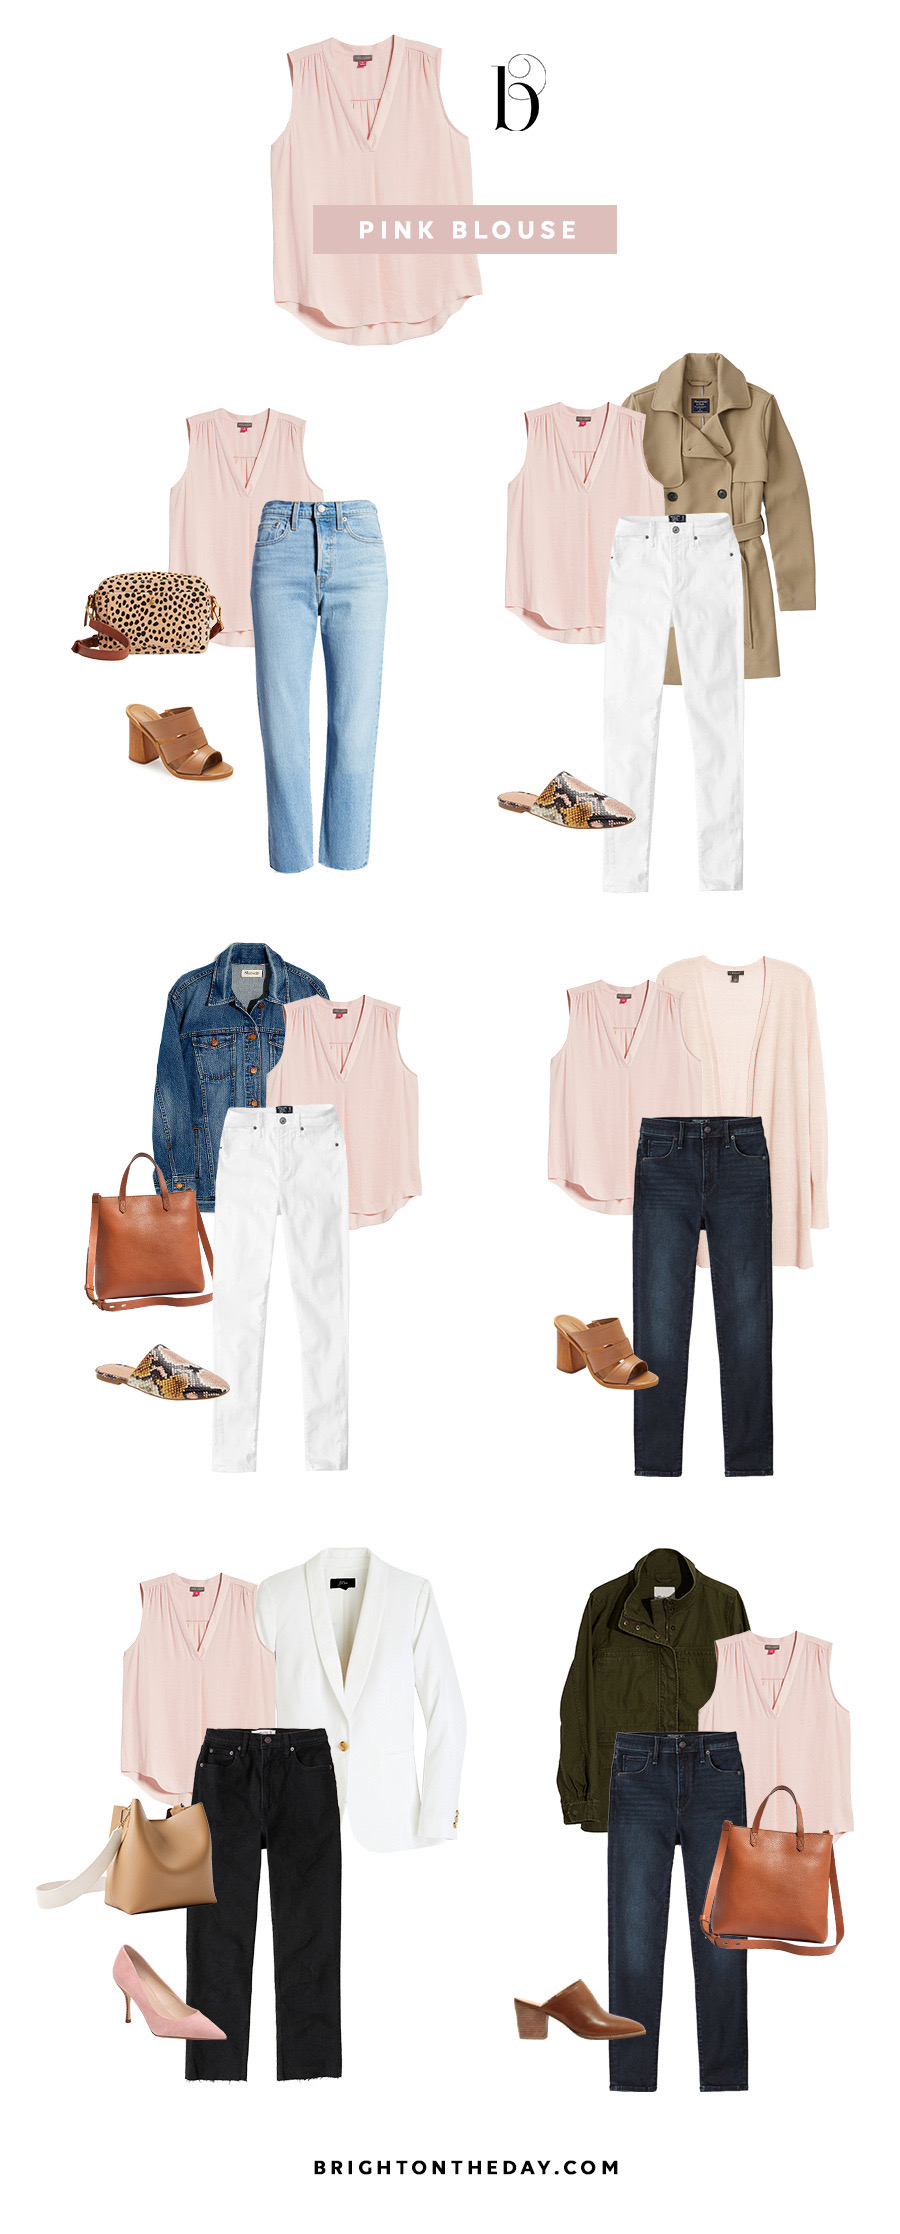 6 Ways to Style a Pink Top